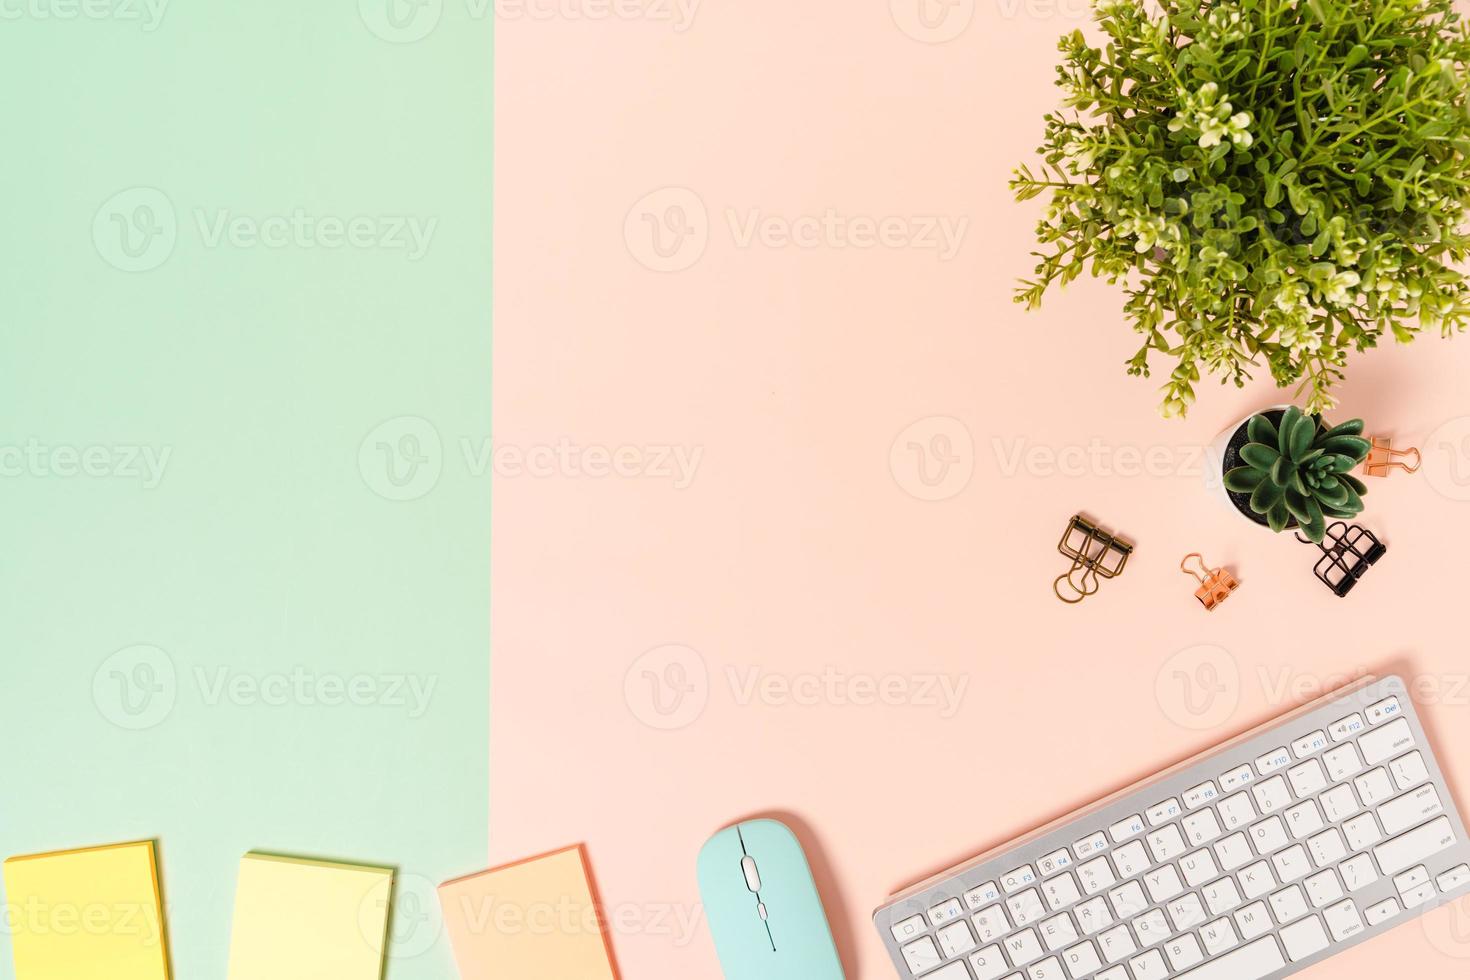 Minimal work space - Creative flat lay photo of workspace desk. Top view office desk with keyboard, mouse and adhesive note on pastel green pink color background. Top view with copy space photography.